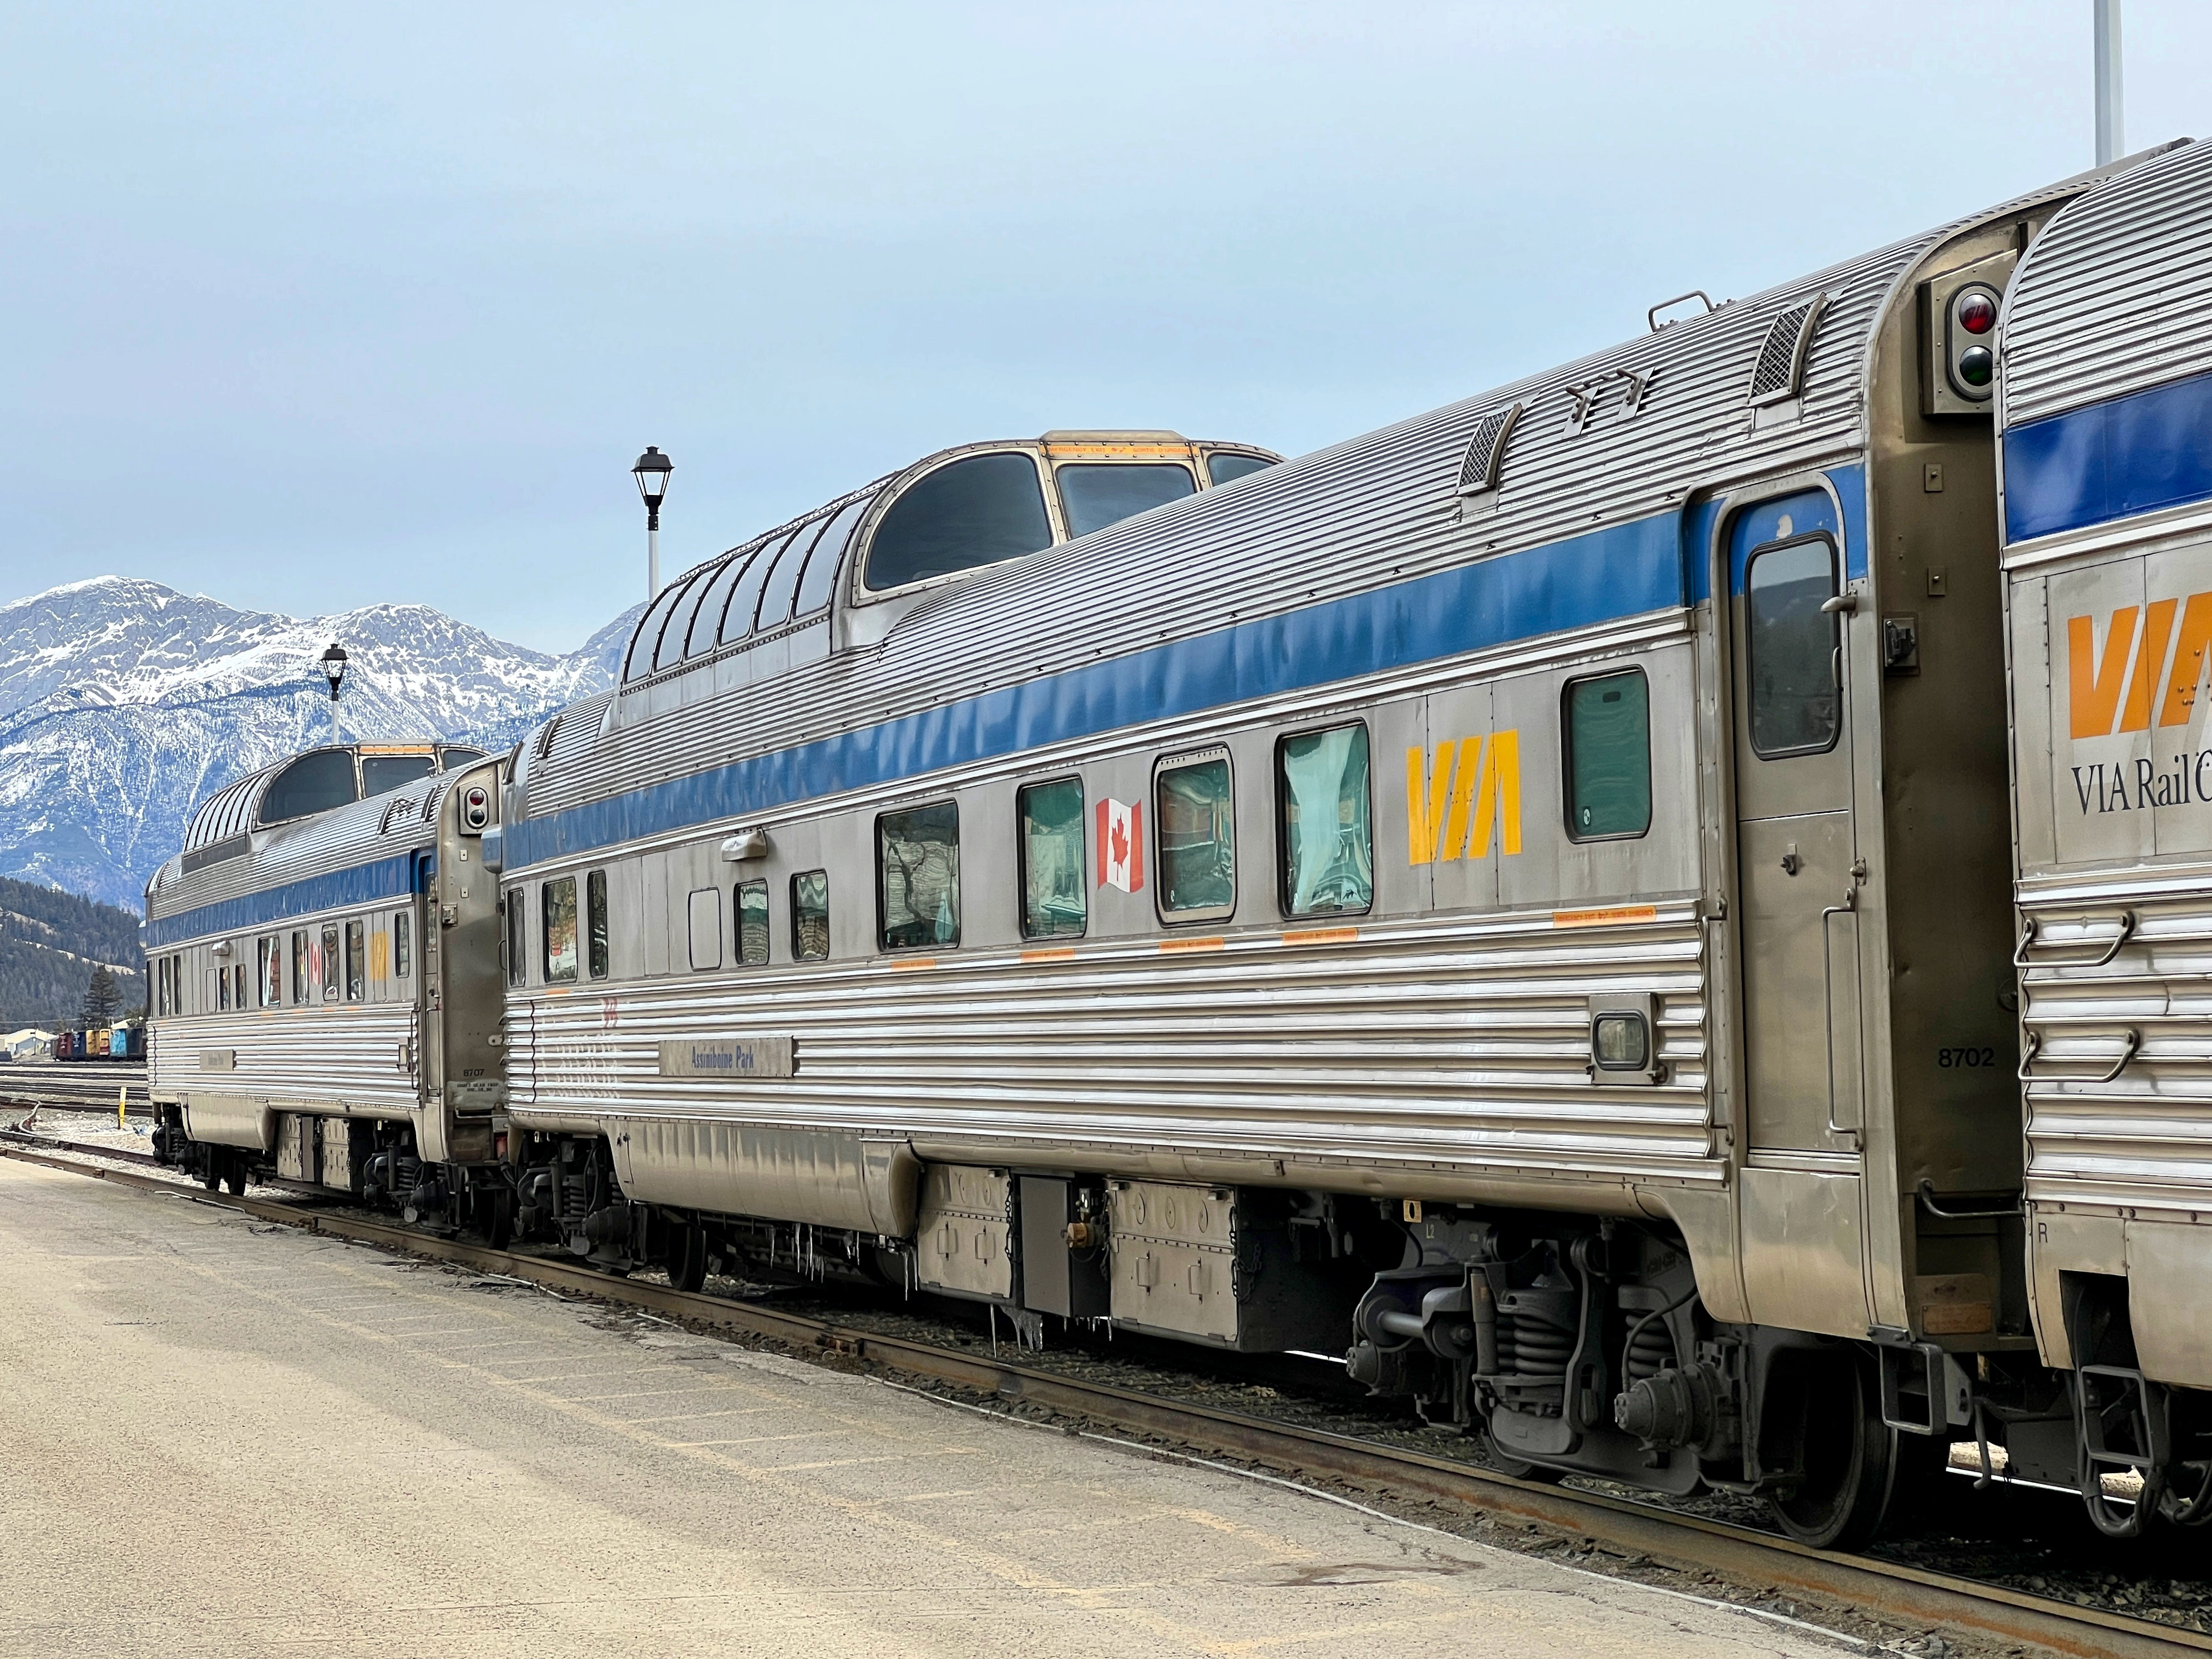 Canadian VIA Rail’s Skeena service awaits departure from the mountain resort town of Jasper, in Alberta, for a two-day journey across British Columbia to the coast. Photo: Peter Neville-Hadley